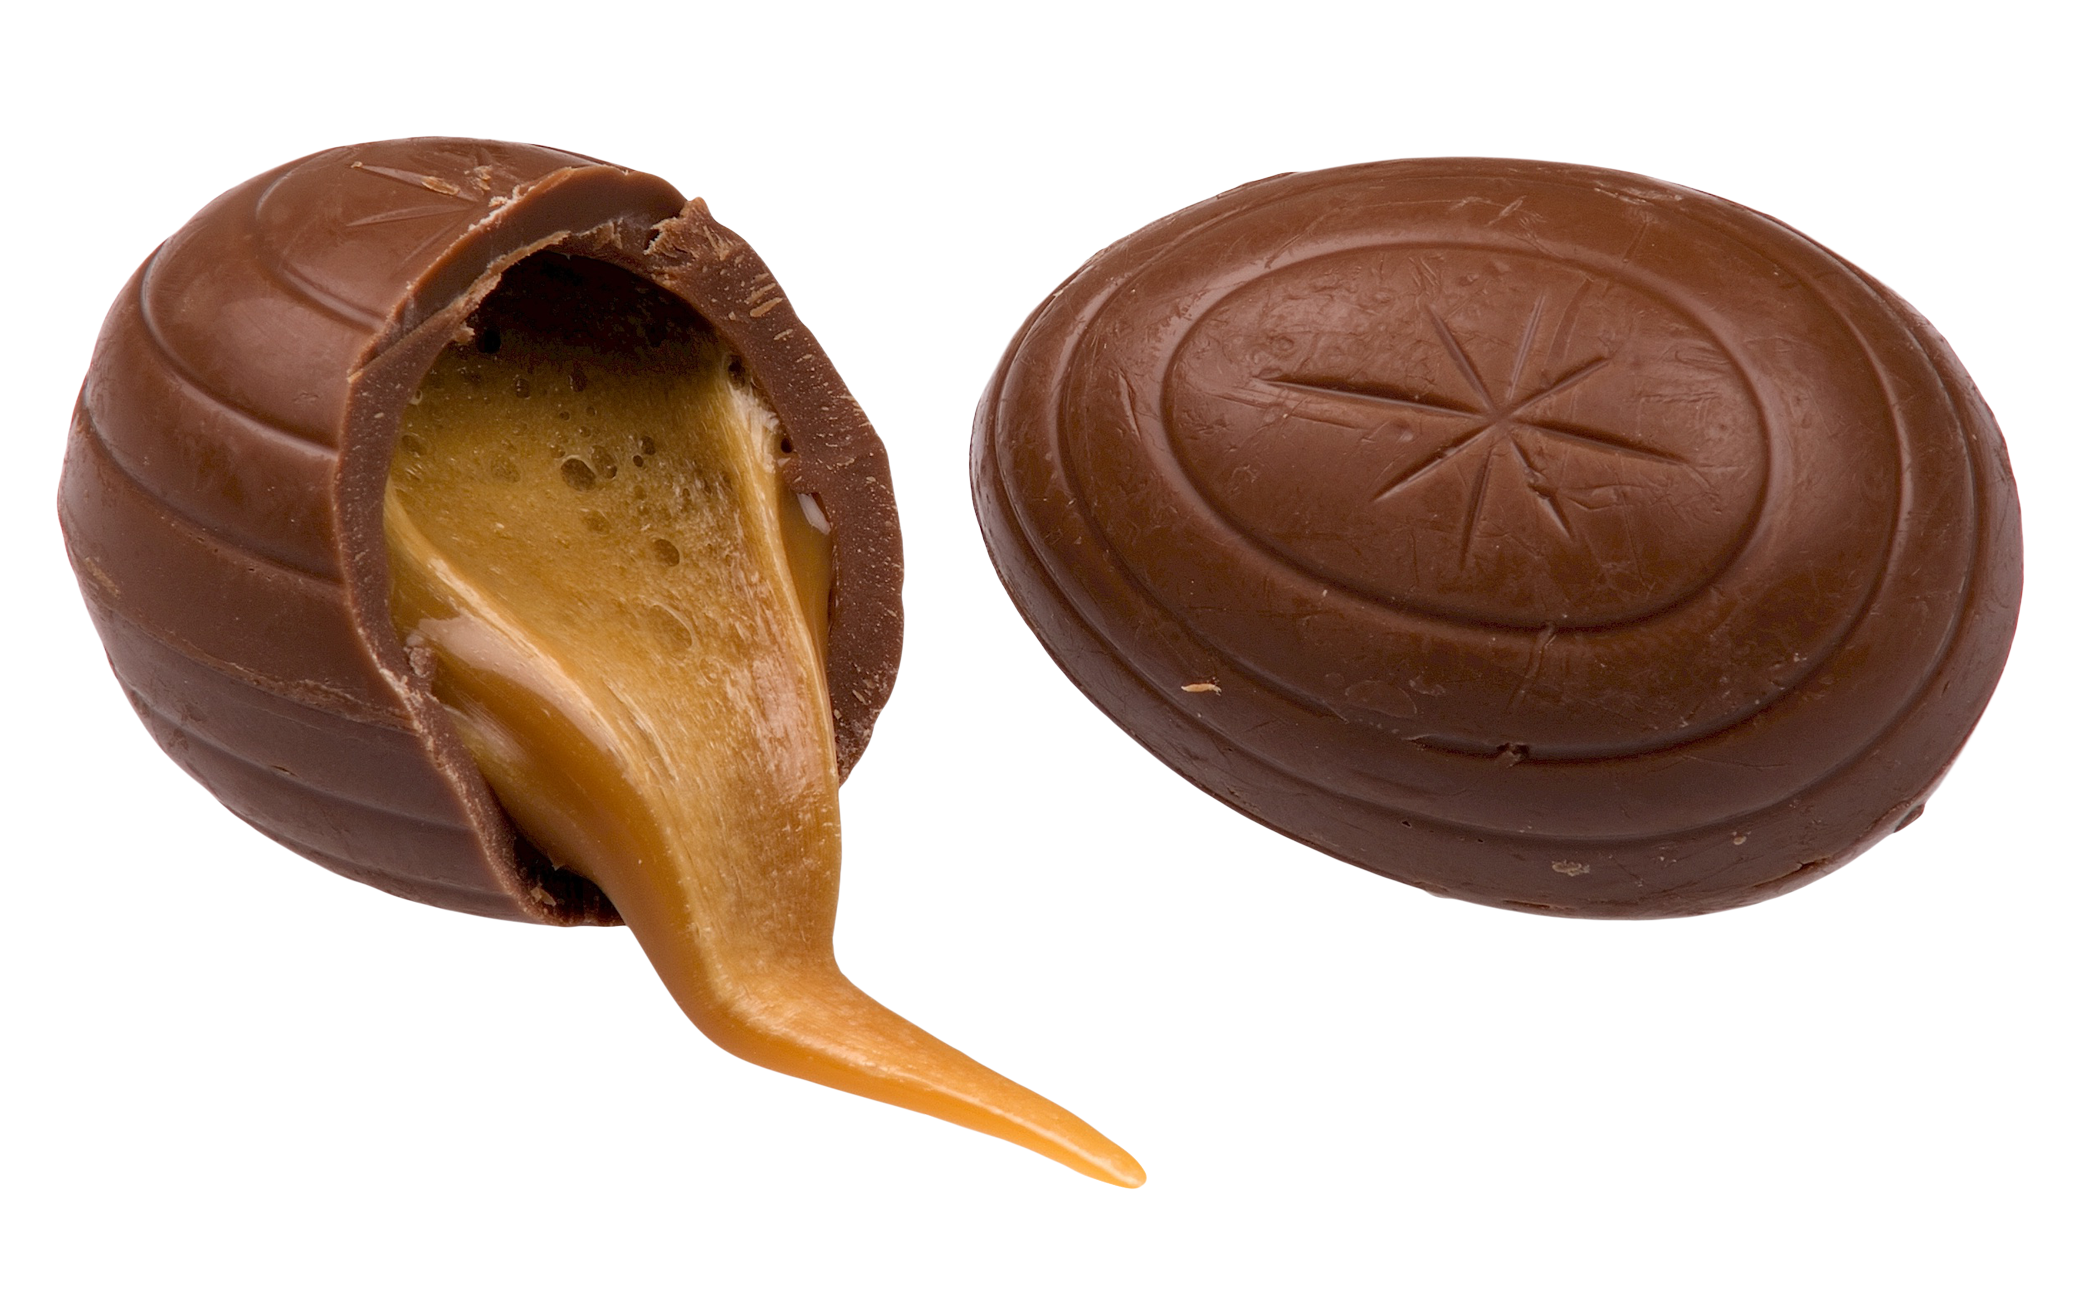 A Chocolate Egg With A Caramel Filling